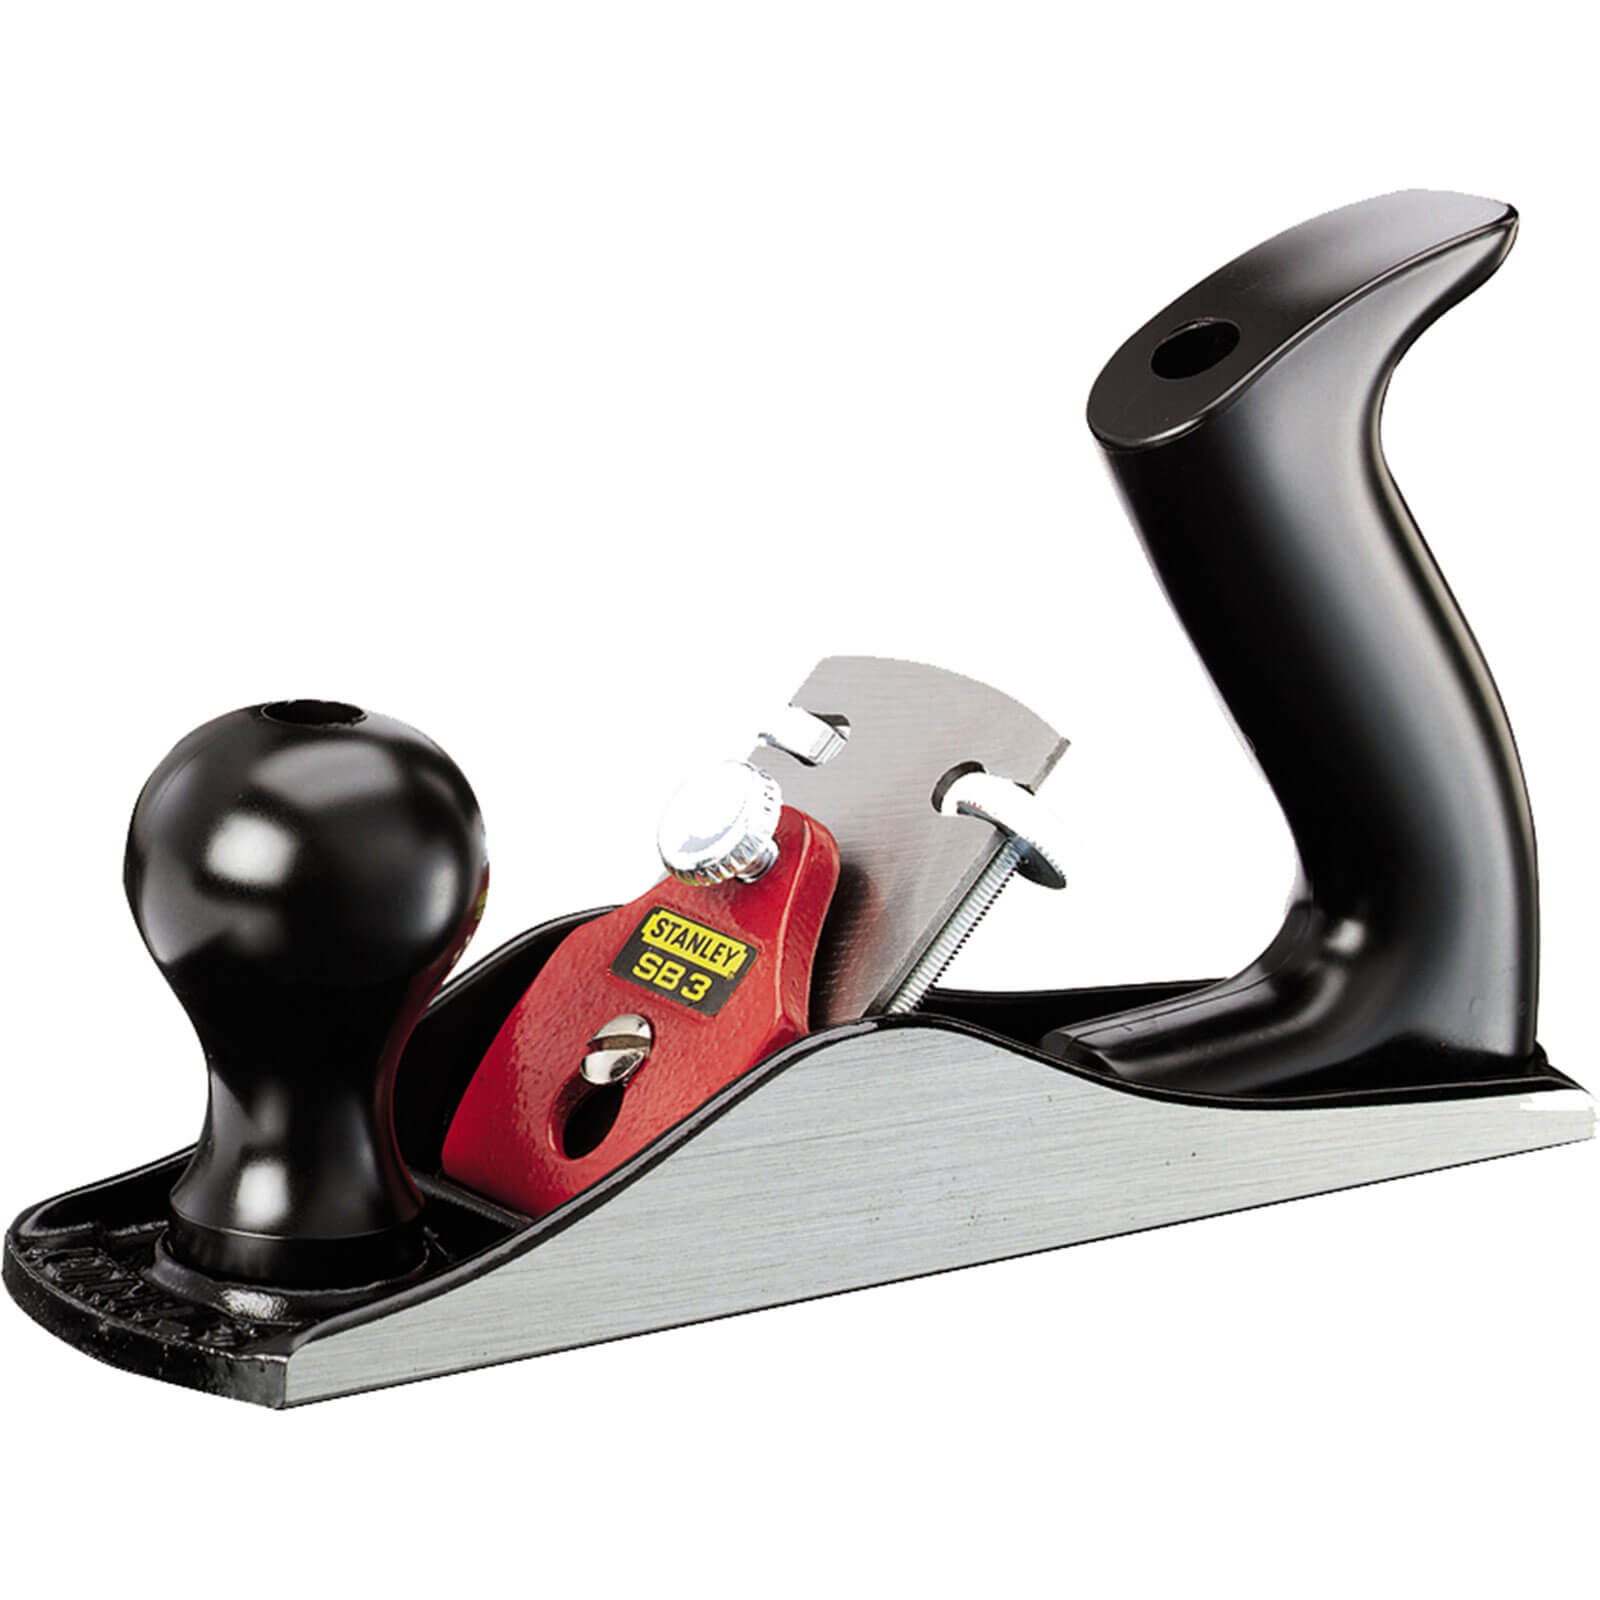 Image of Stanley SB4 Light Duty Smoothing Plane